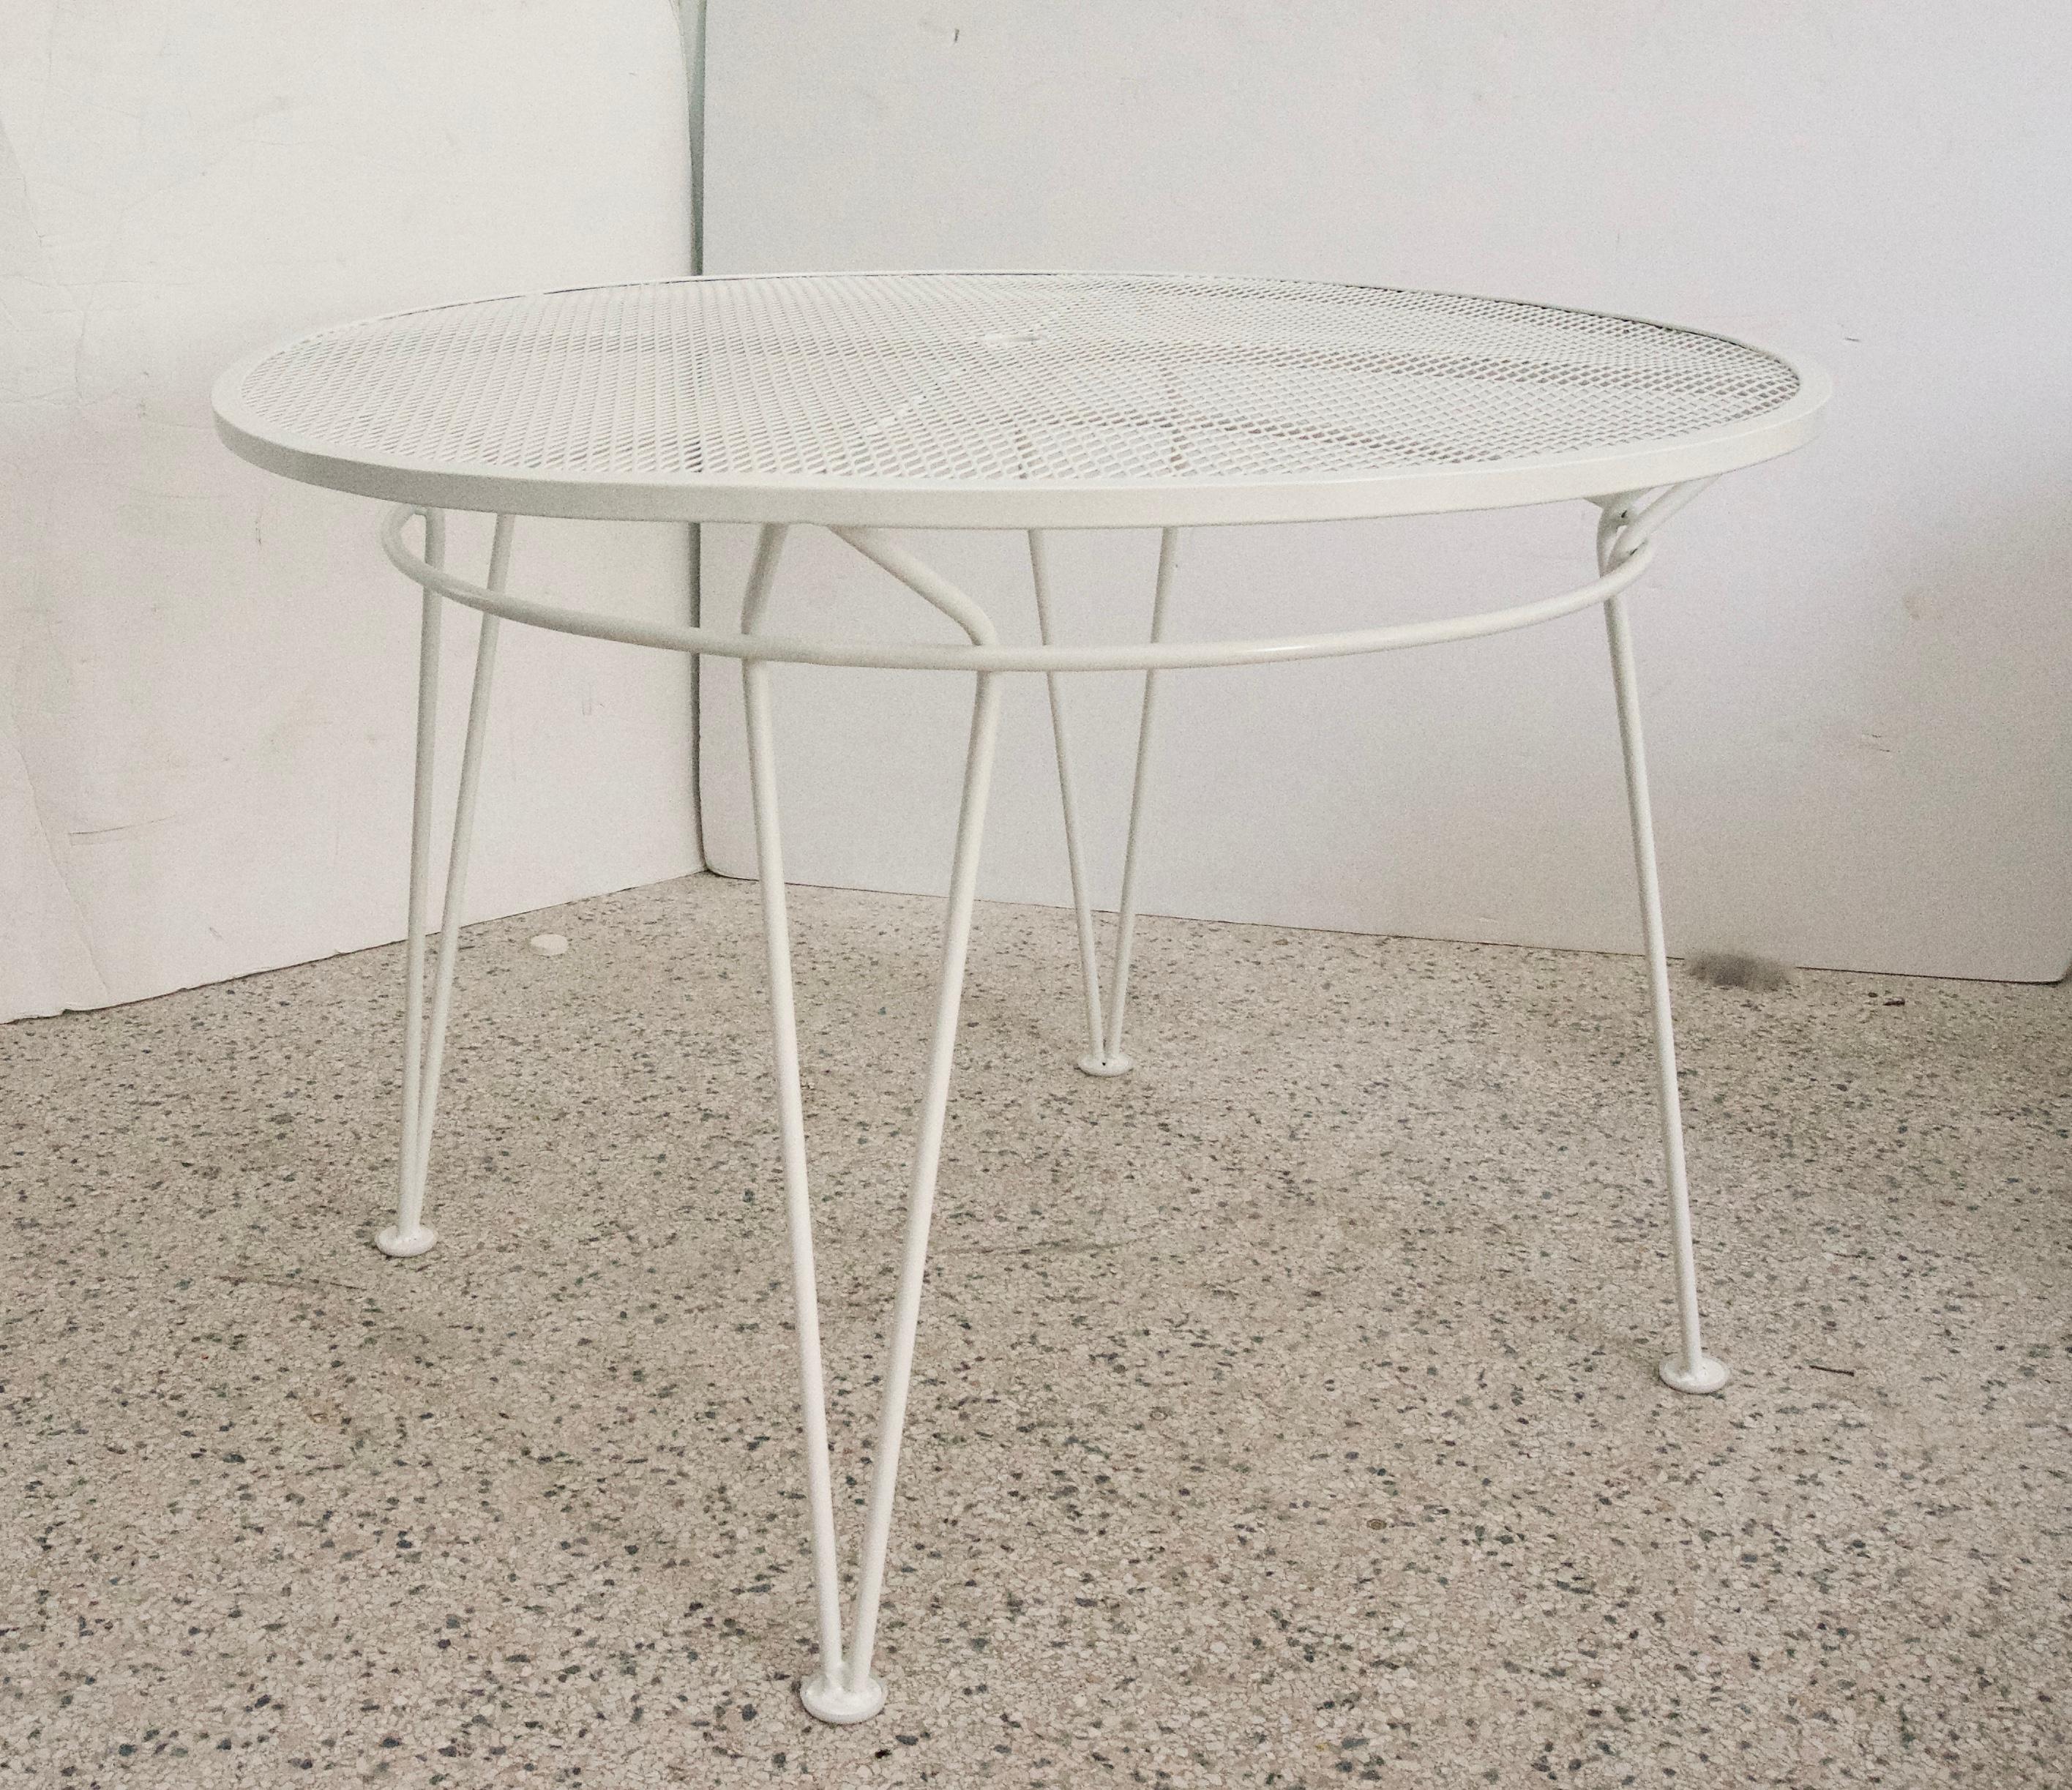 This piece has been professionally restored and powder-coated in Palm Beach White.

We also have two settees, armchairand a small side table in the some pattern and color for sale.

Note: Opening for umbrella is 1.50